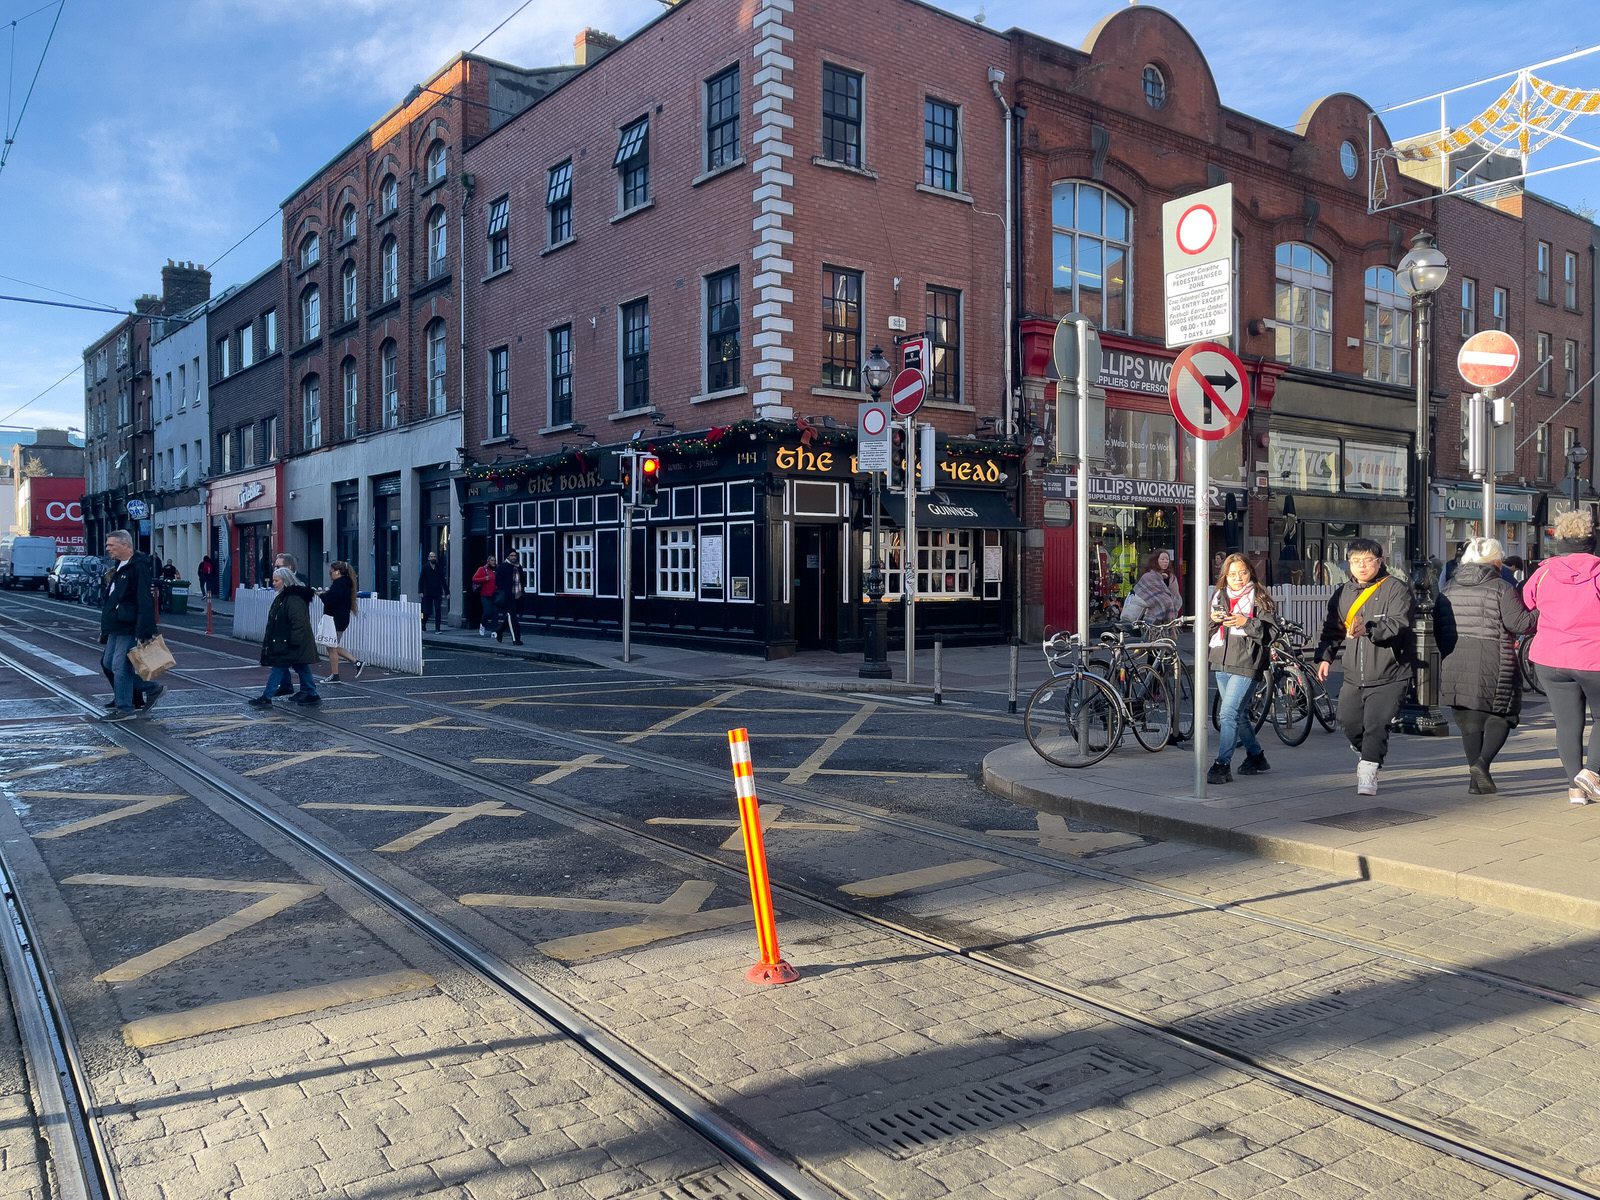 THE NEW STREET FURNITURE AND THE CHRISTMAS TREE [HAVE ARRIVED IN CAPEL STREET]-225872-1